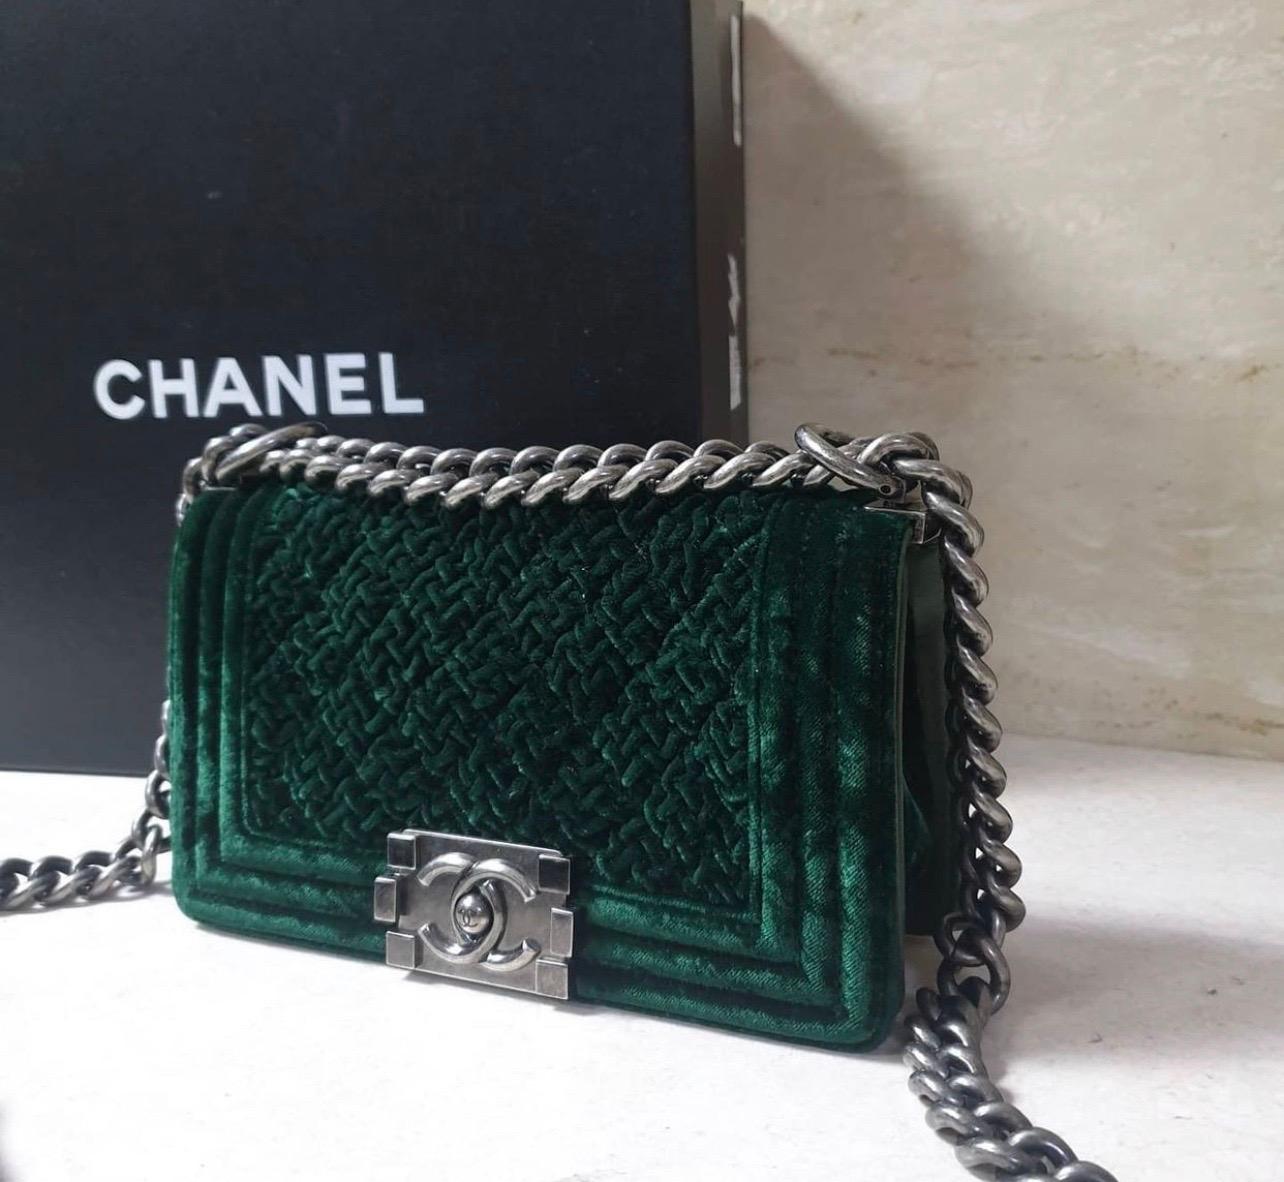 Chanel Dark Green Lambskin Leather & Velvet Mini Boy Bag with Antiqued Silver Hardware.

This bag is part of the Boy Chanel Collection, originally released in 2011. This is a new and fresh look for Chanel. The boy bag's shape in supposedly inspired